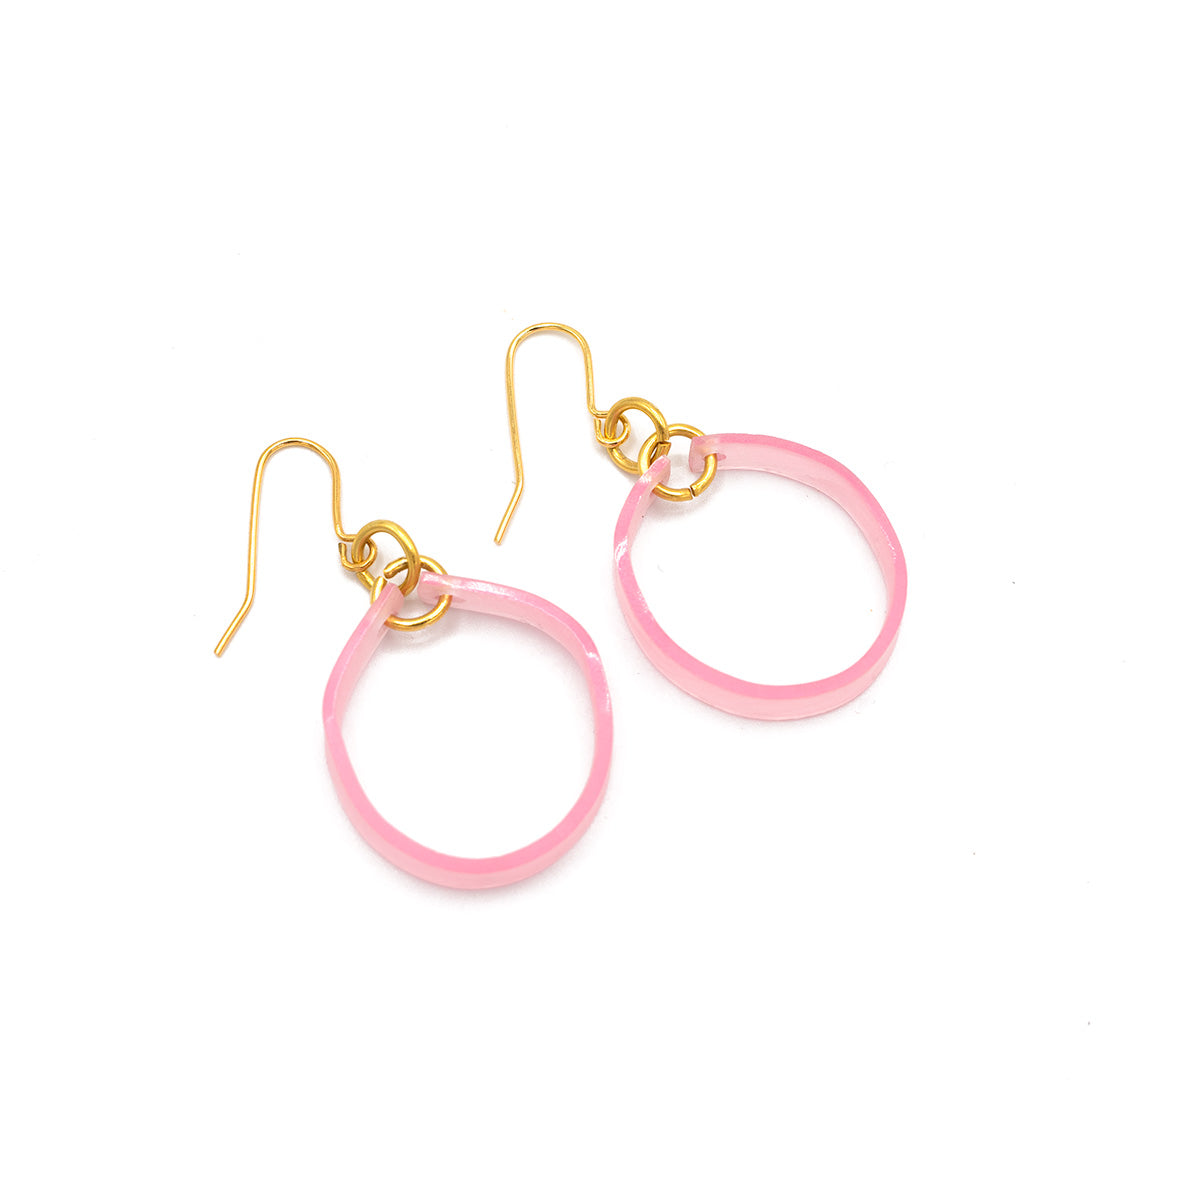 Pink acetate hoop earrings with gold hook fastening - photographed laid flat against a white background